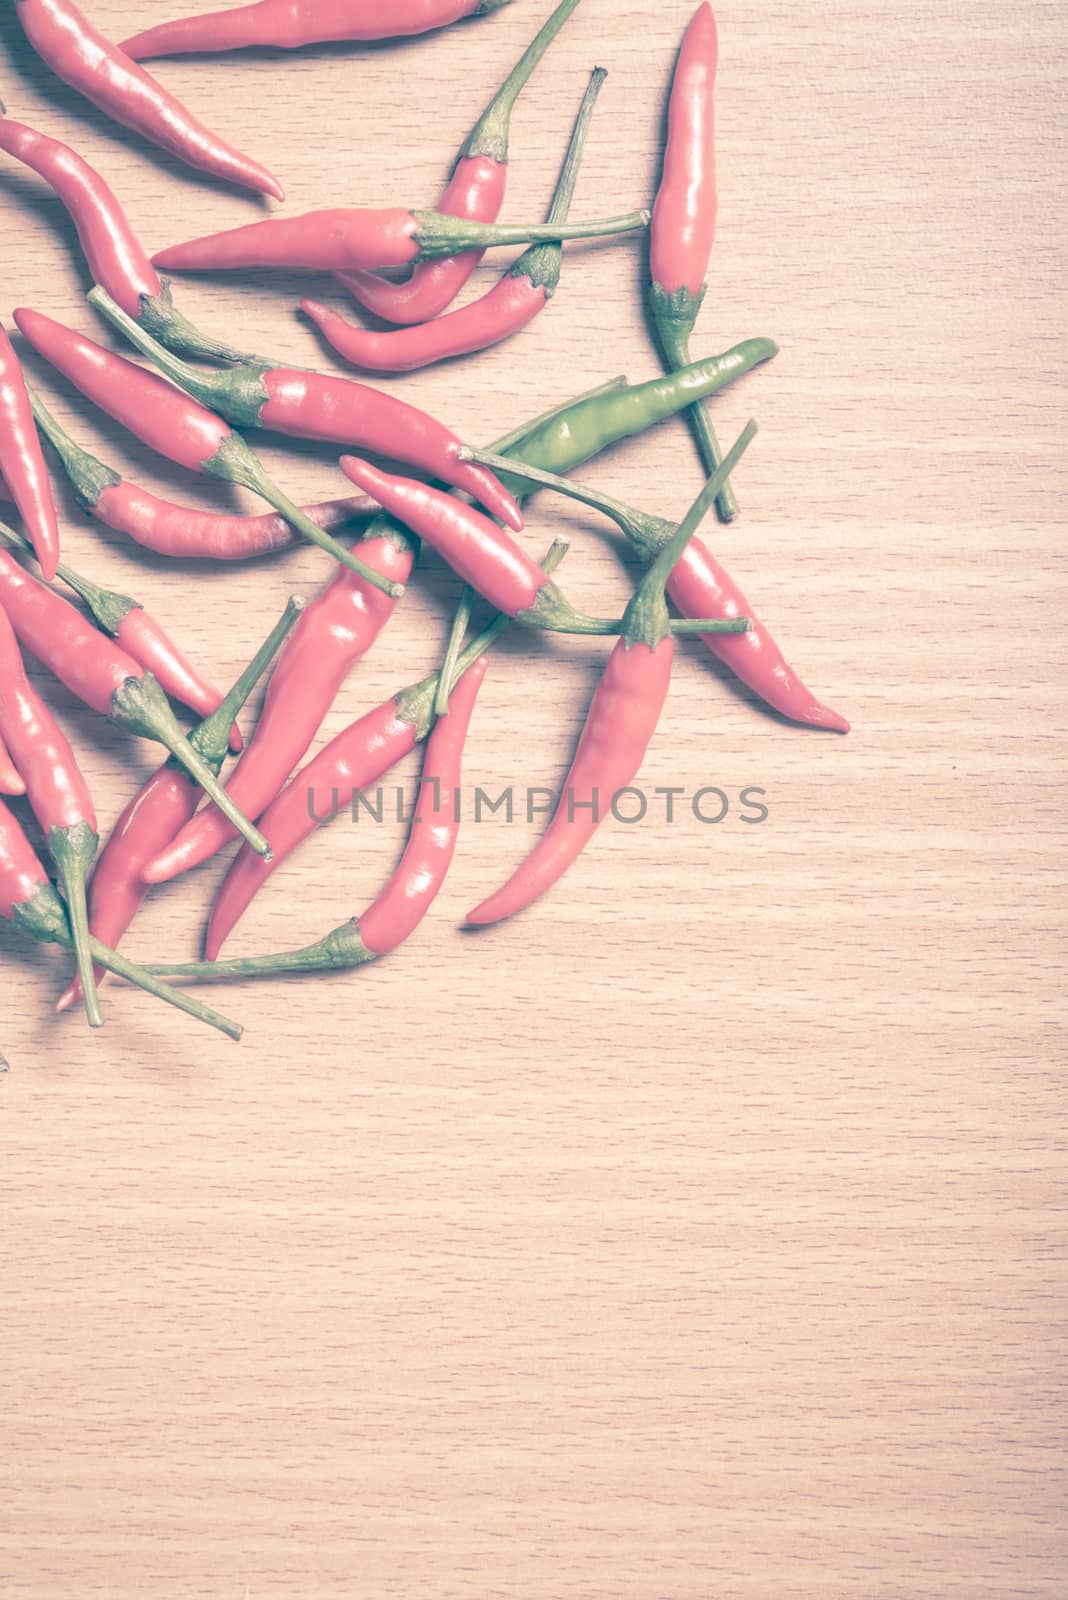 red chili peppers on wood table background vintage style